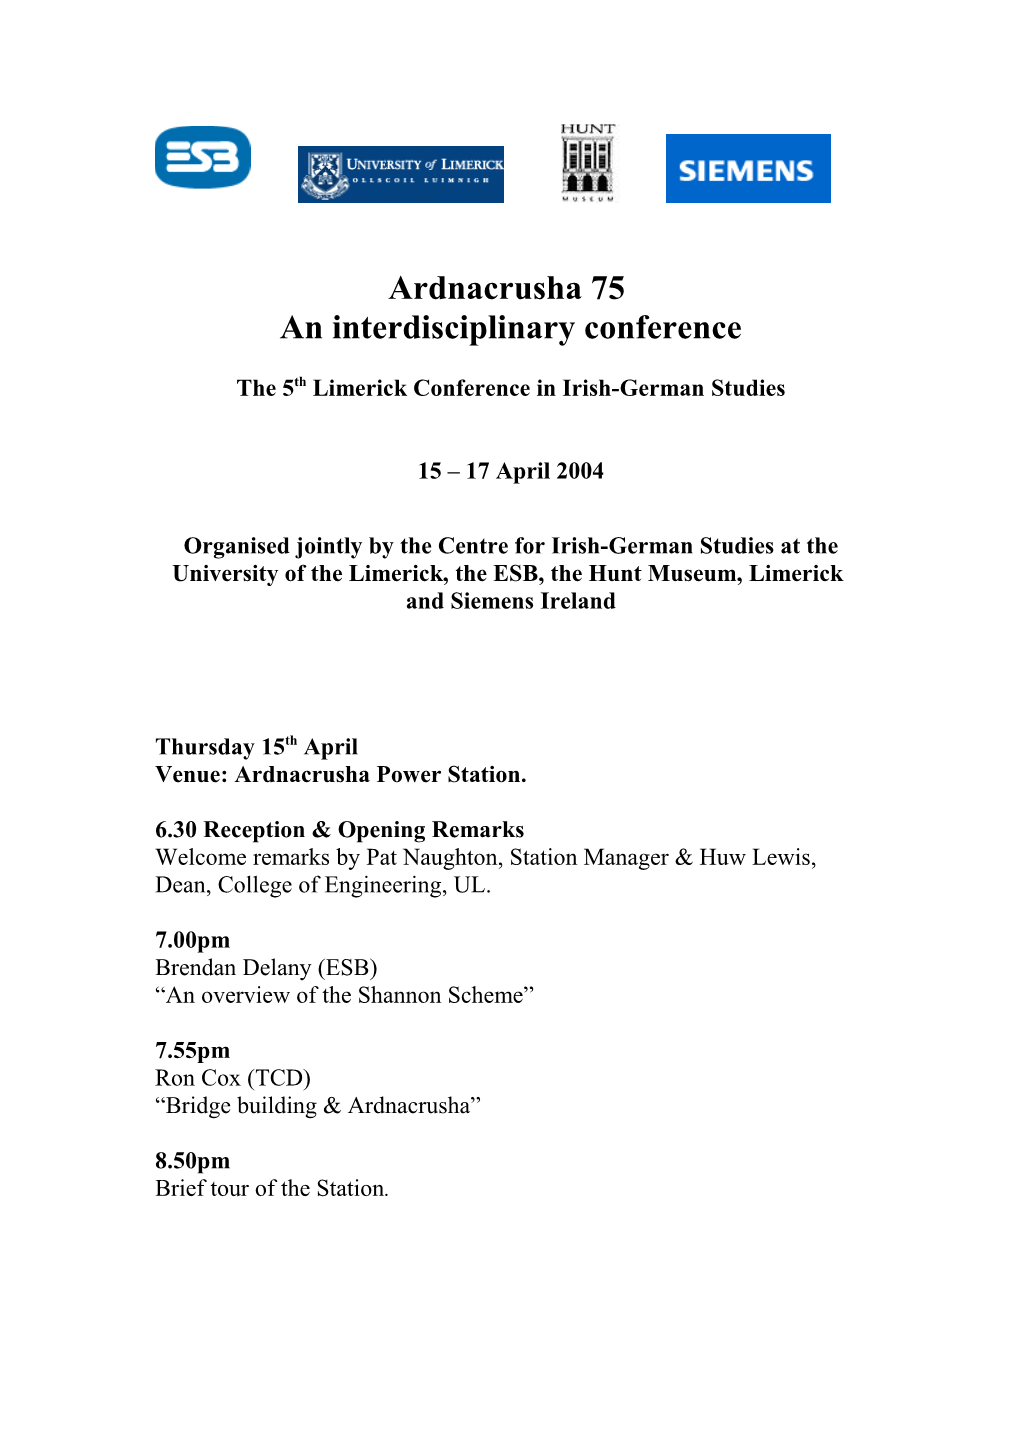 The 5Th Limerick Conference in Irish-German Studies